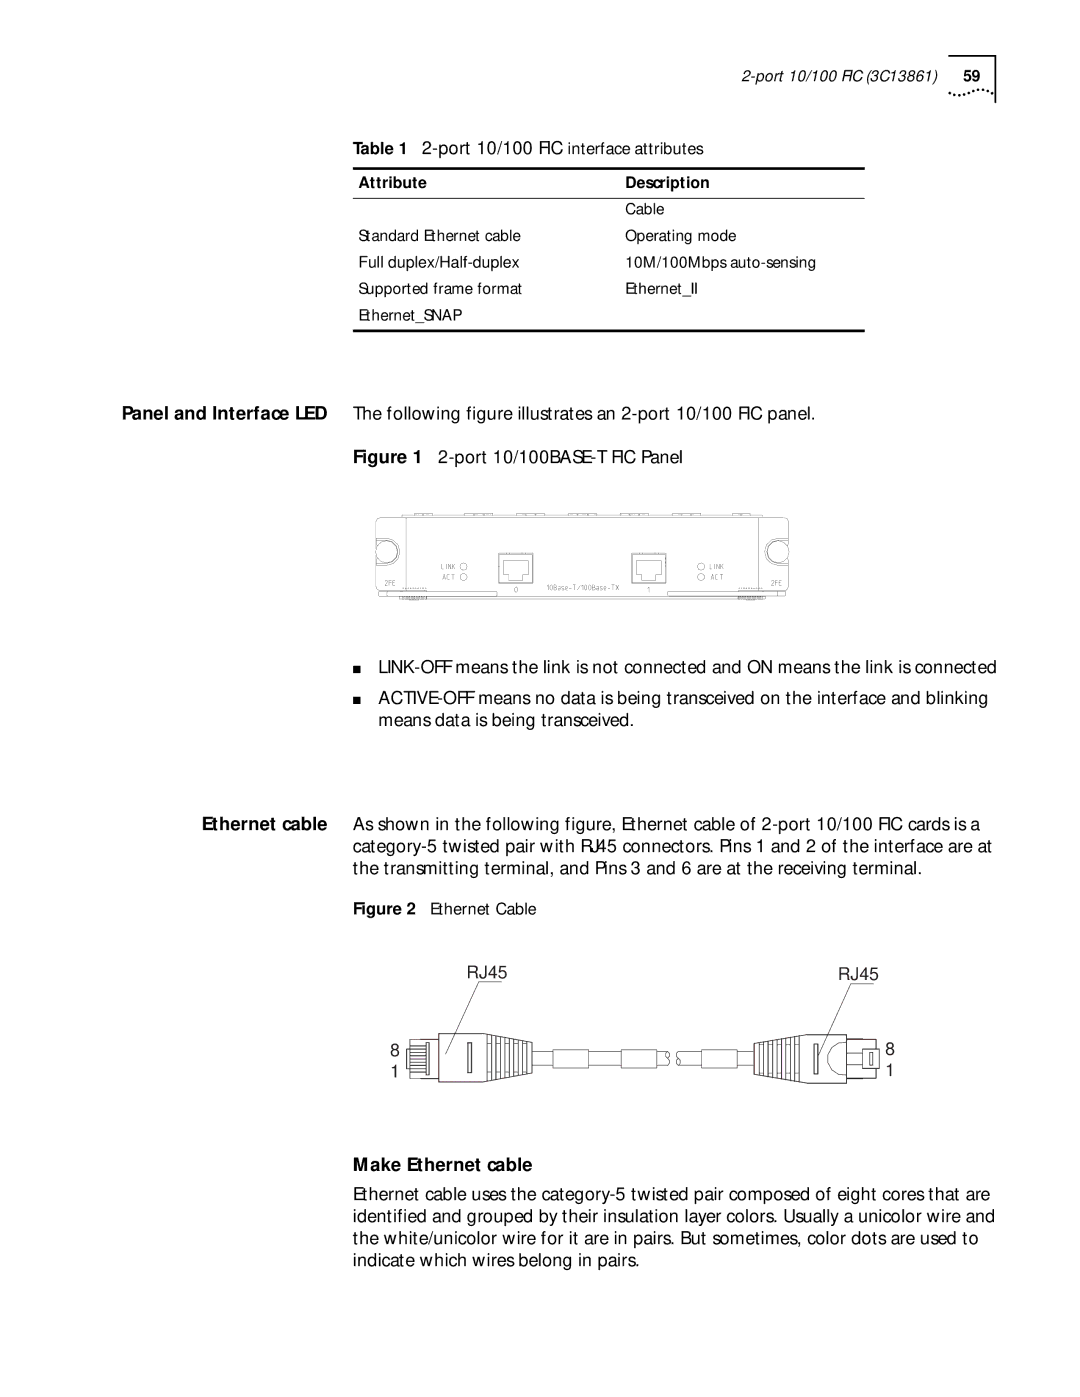 HP 6000 Router manual Make Ethernet cable, Ethernet Cable 